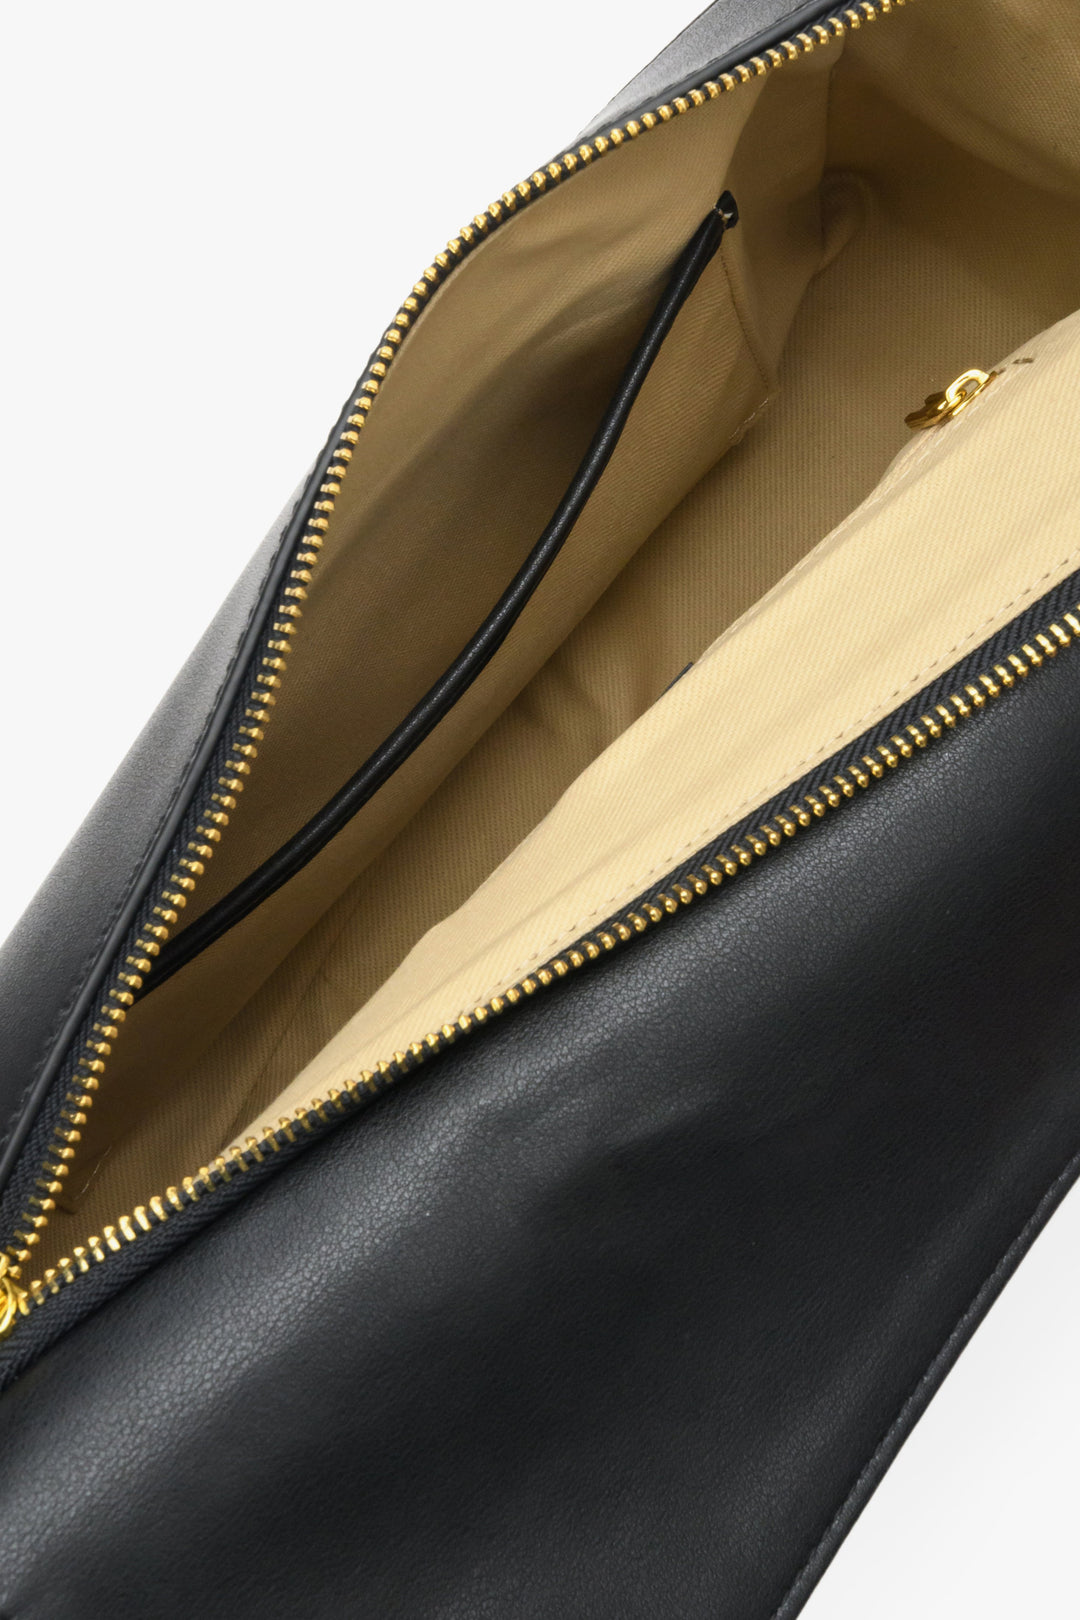 Leather women's handbag in black by Estro - close-up on the details.